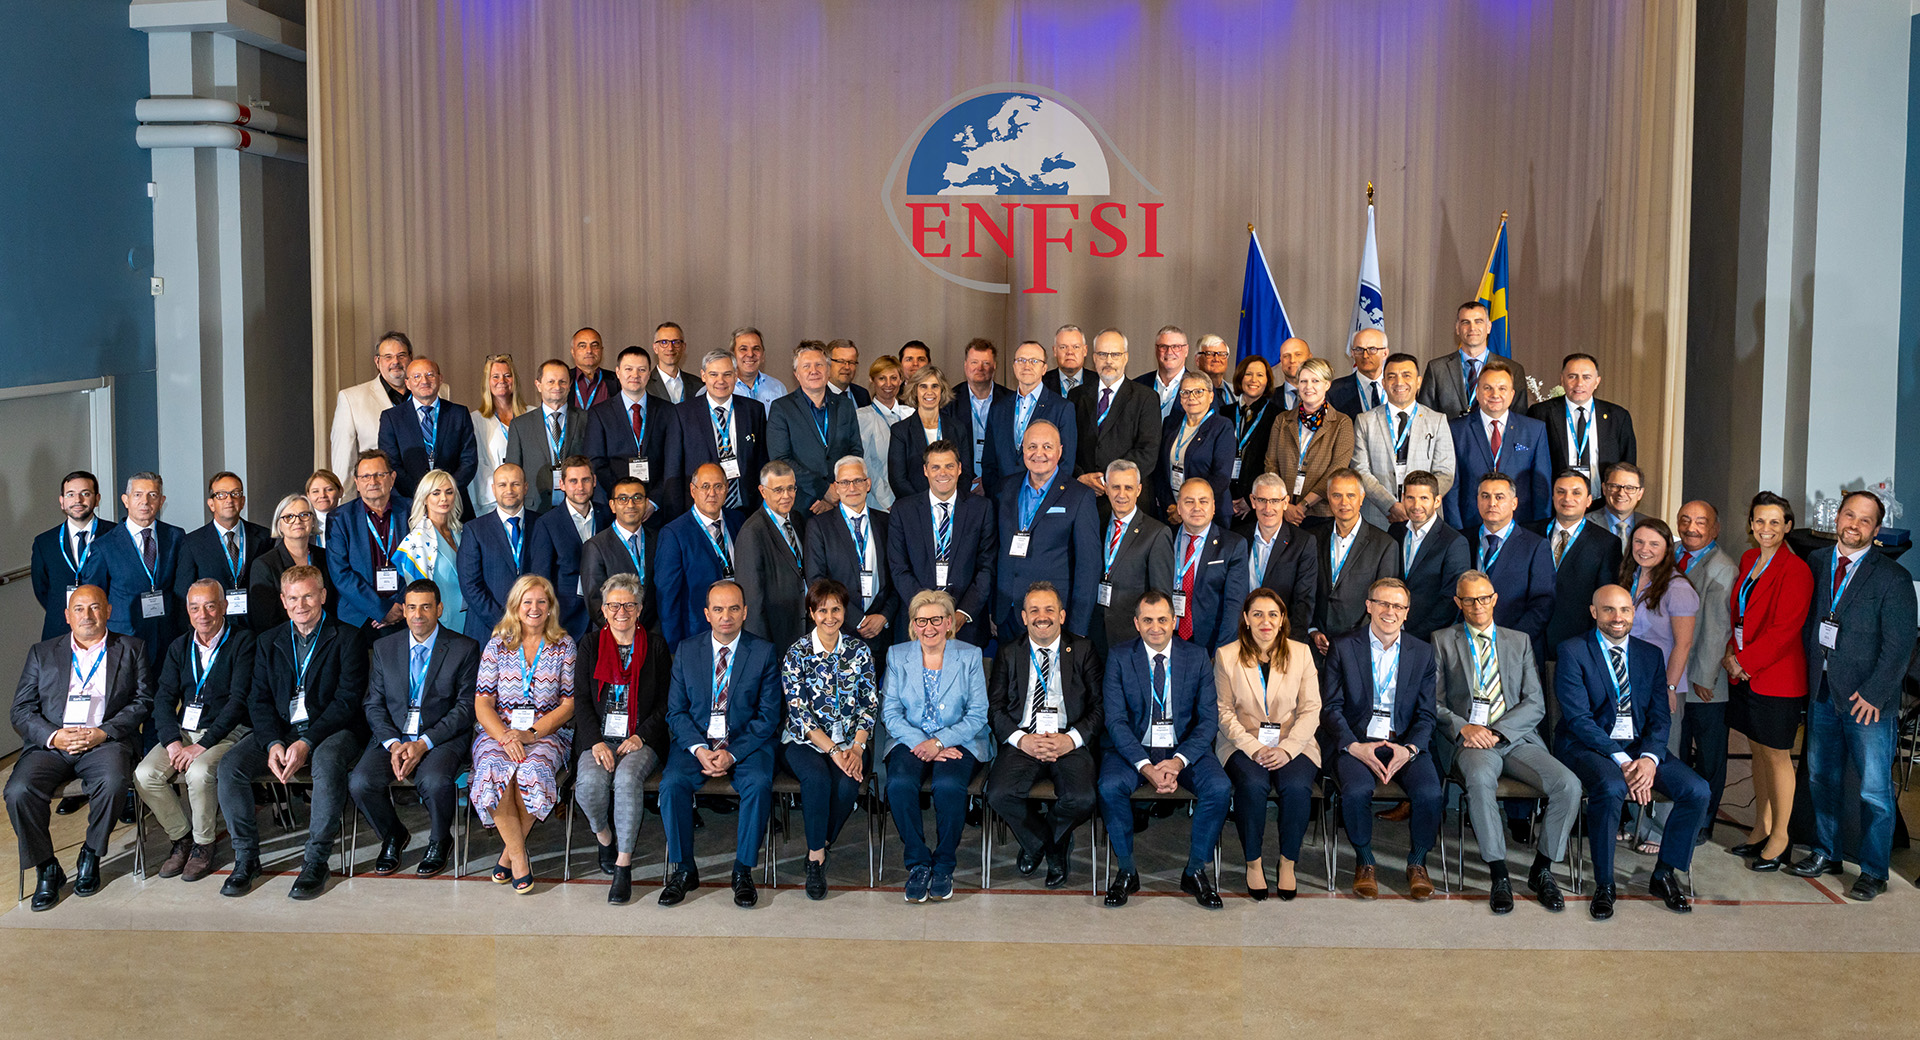 Participants in ENFSI Annual Meeting, 2022, in Stockholm. Photo by Marcus Andrae